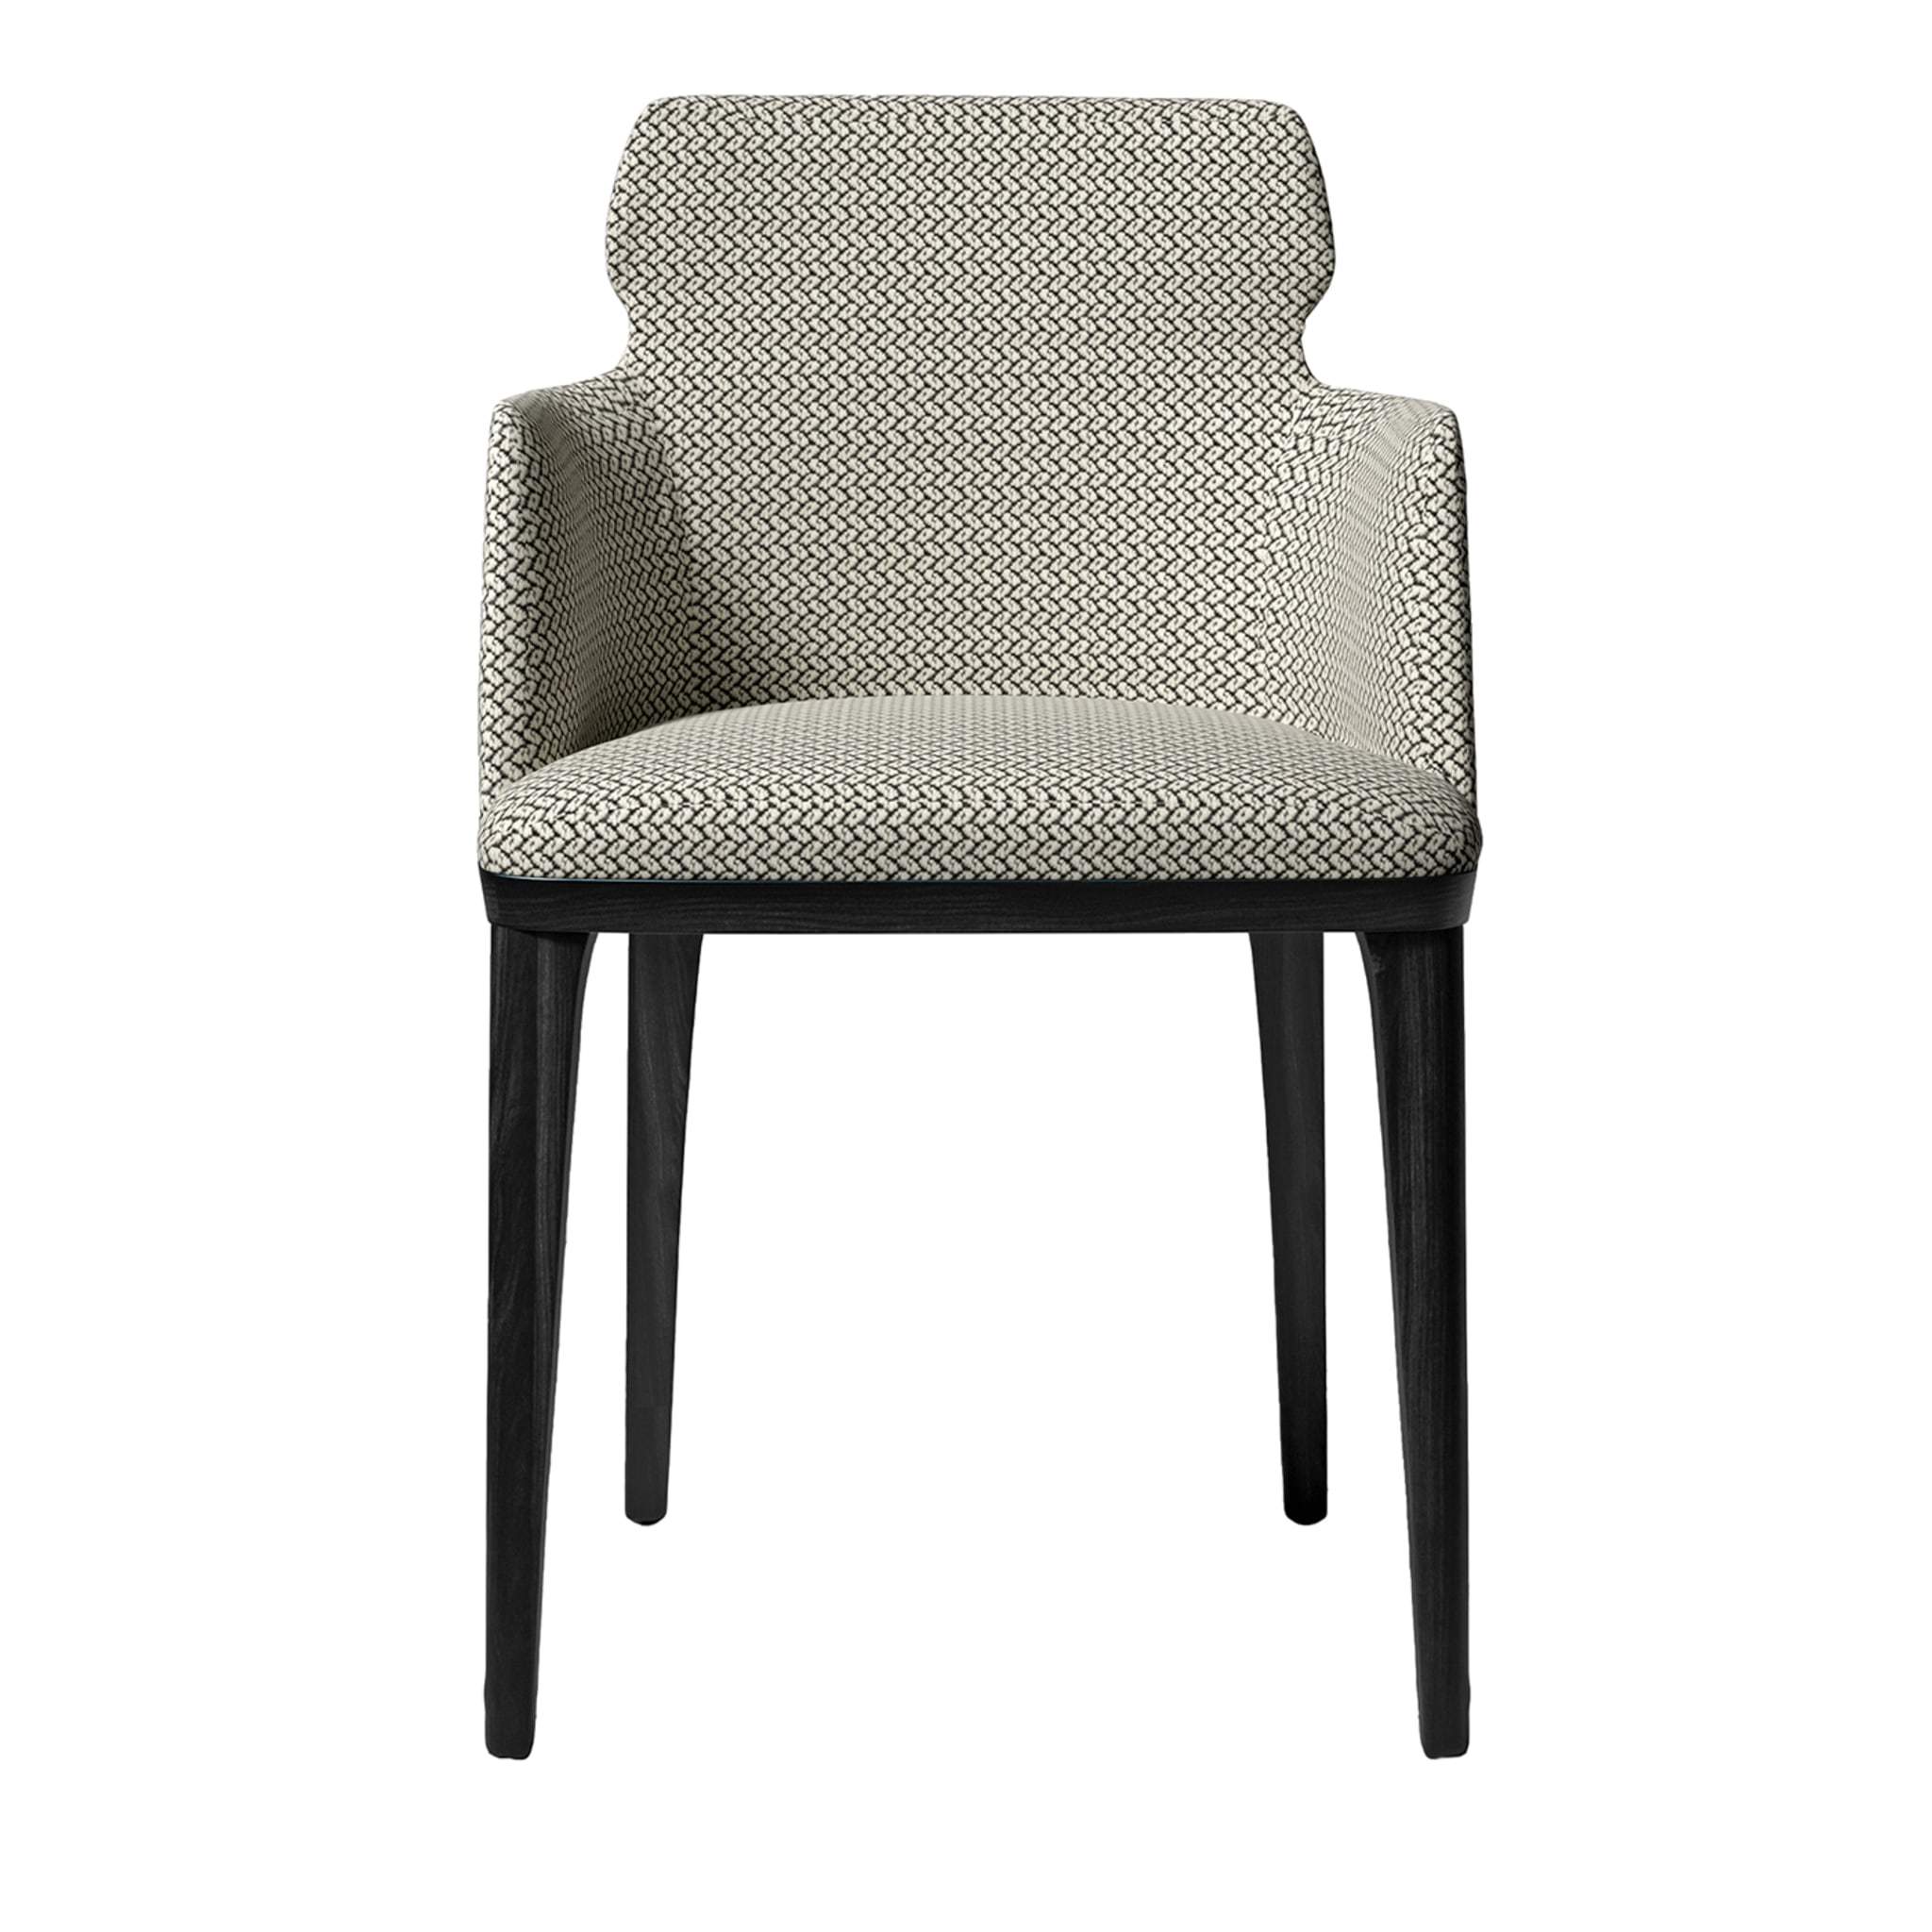 Shape Patterned Gray Armchair - Main view